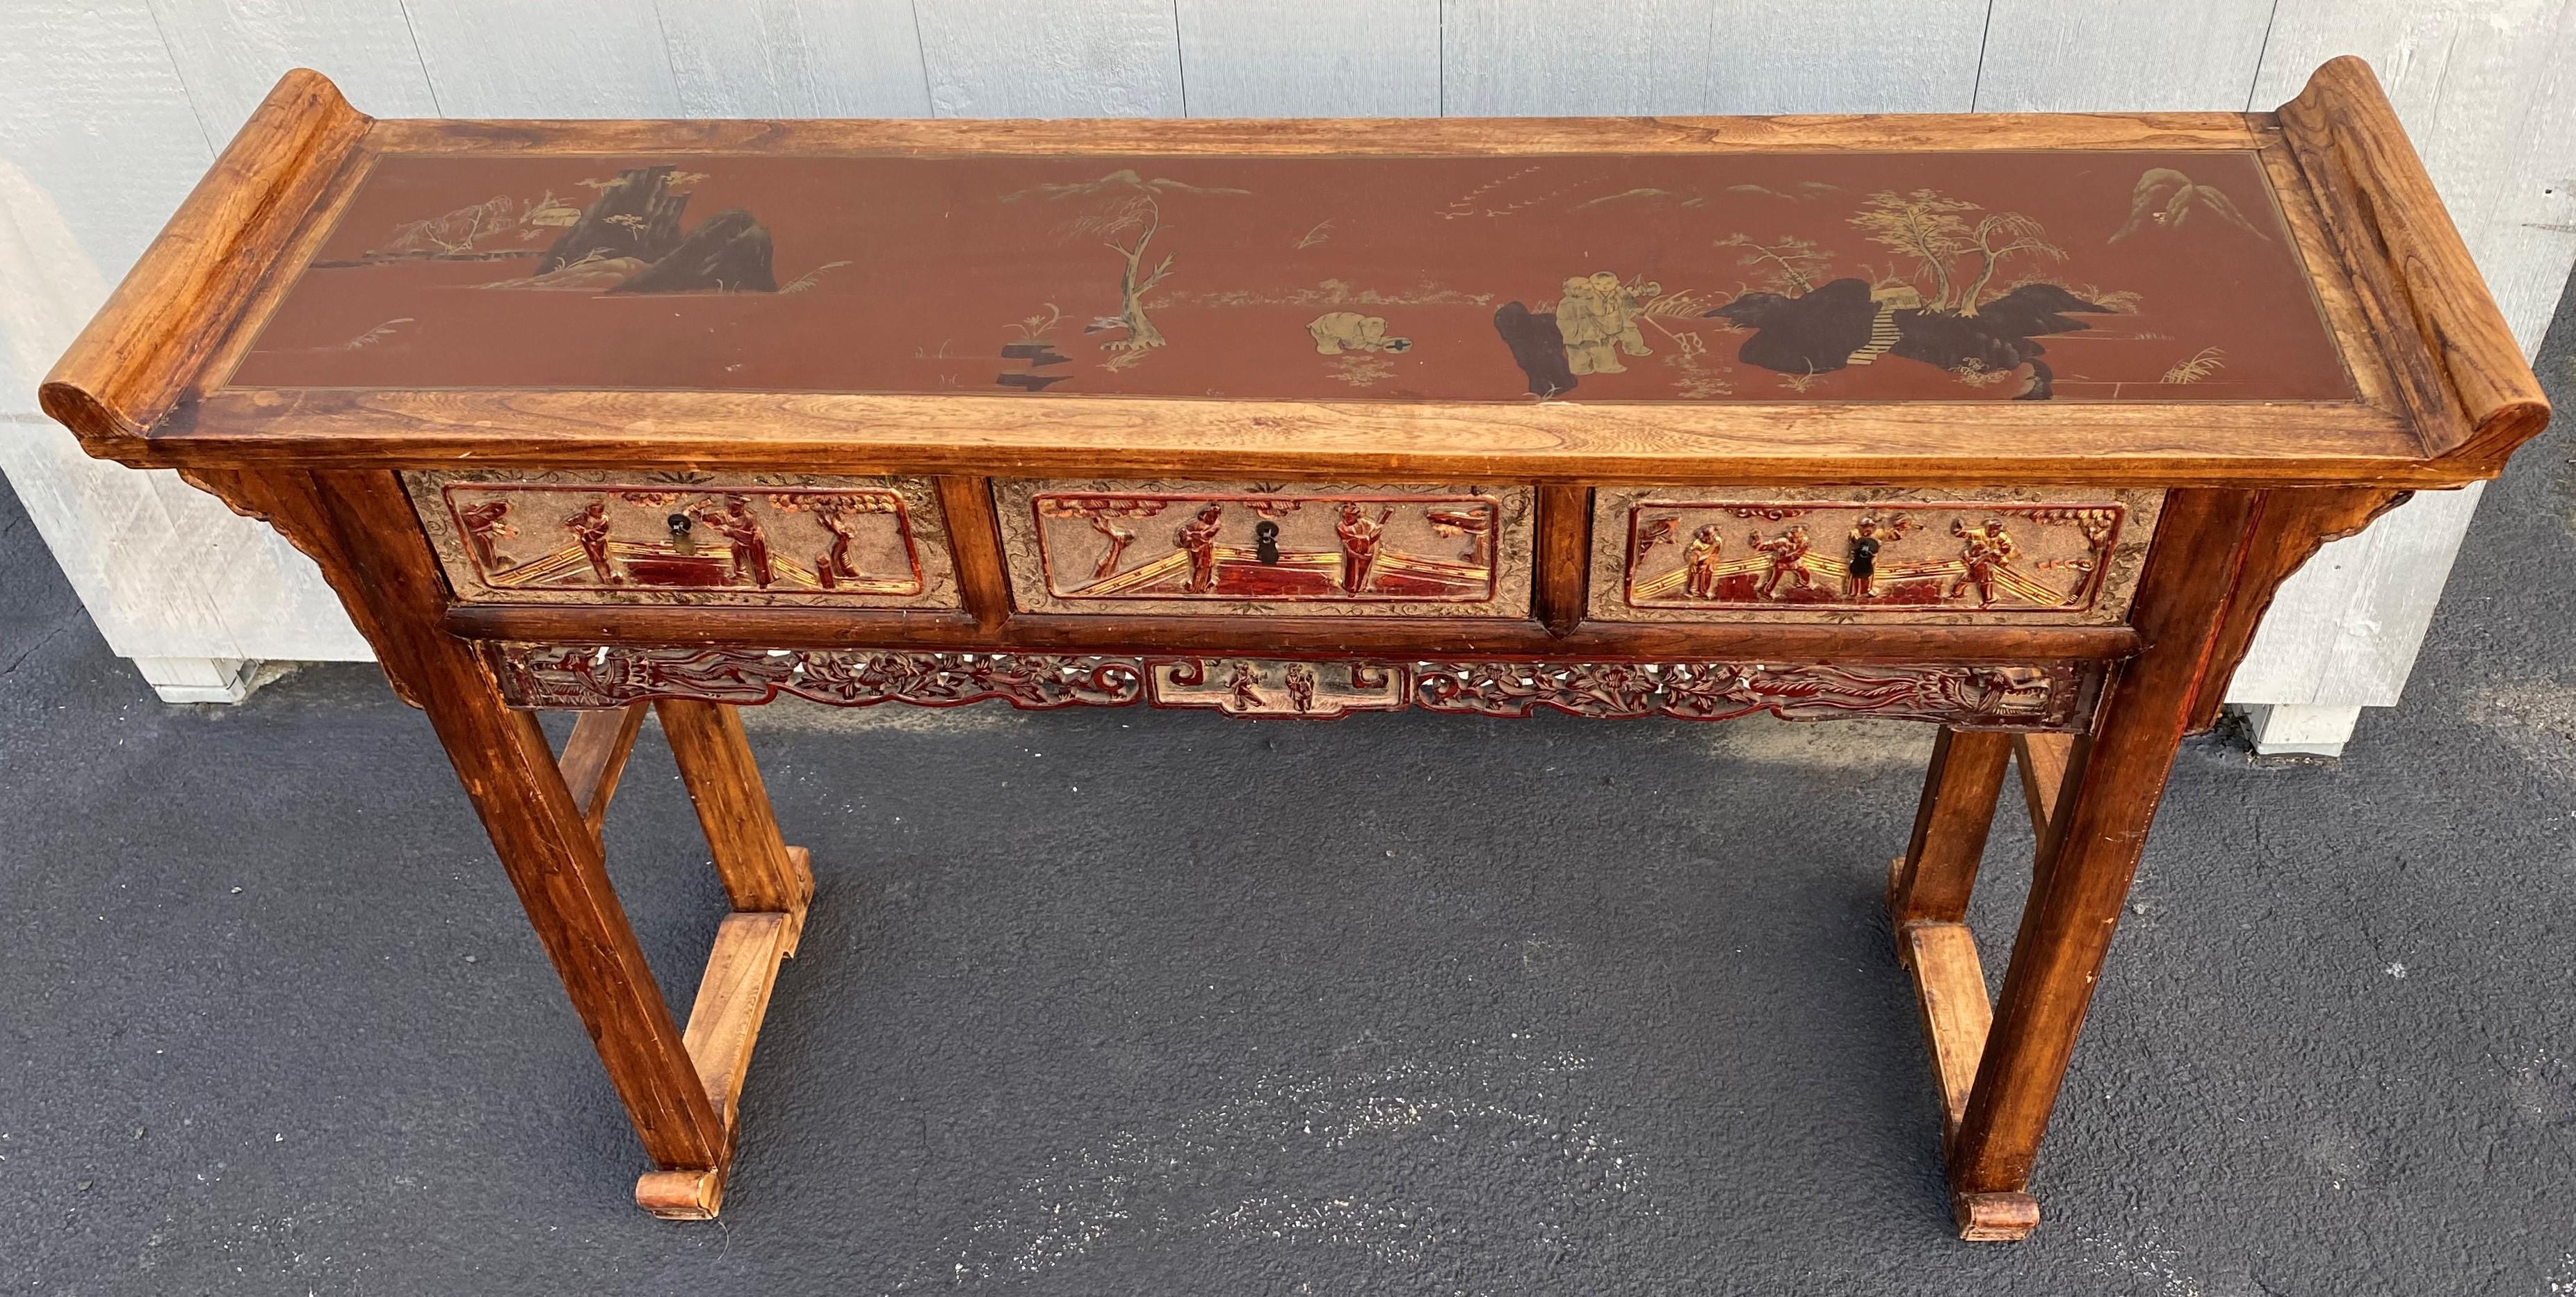 A finely carved polychrome three-drawer hardwood altar table with relief carved genre scenes on each drawer front and the top of each end, as well as painted scenes with landscapes and figures on an oxblood background the top, as well as a